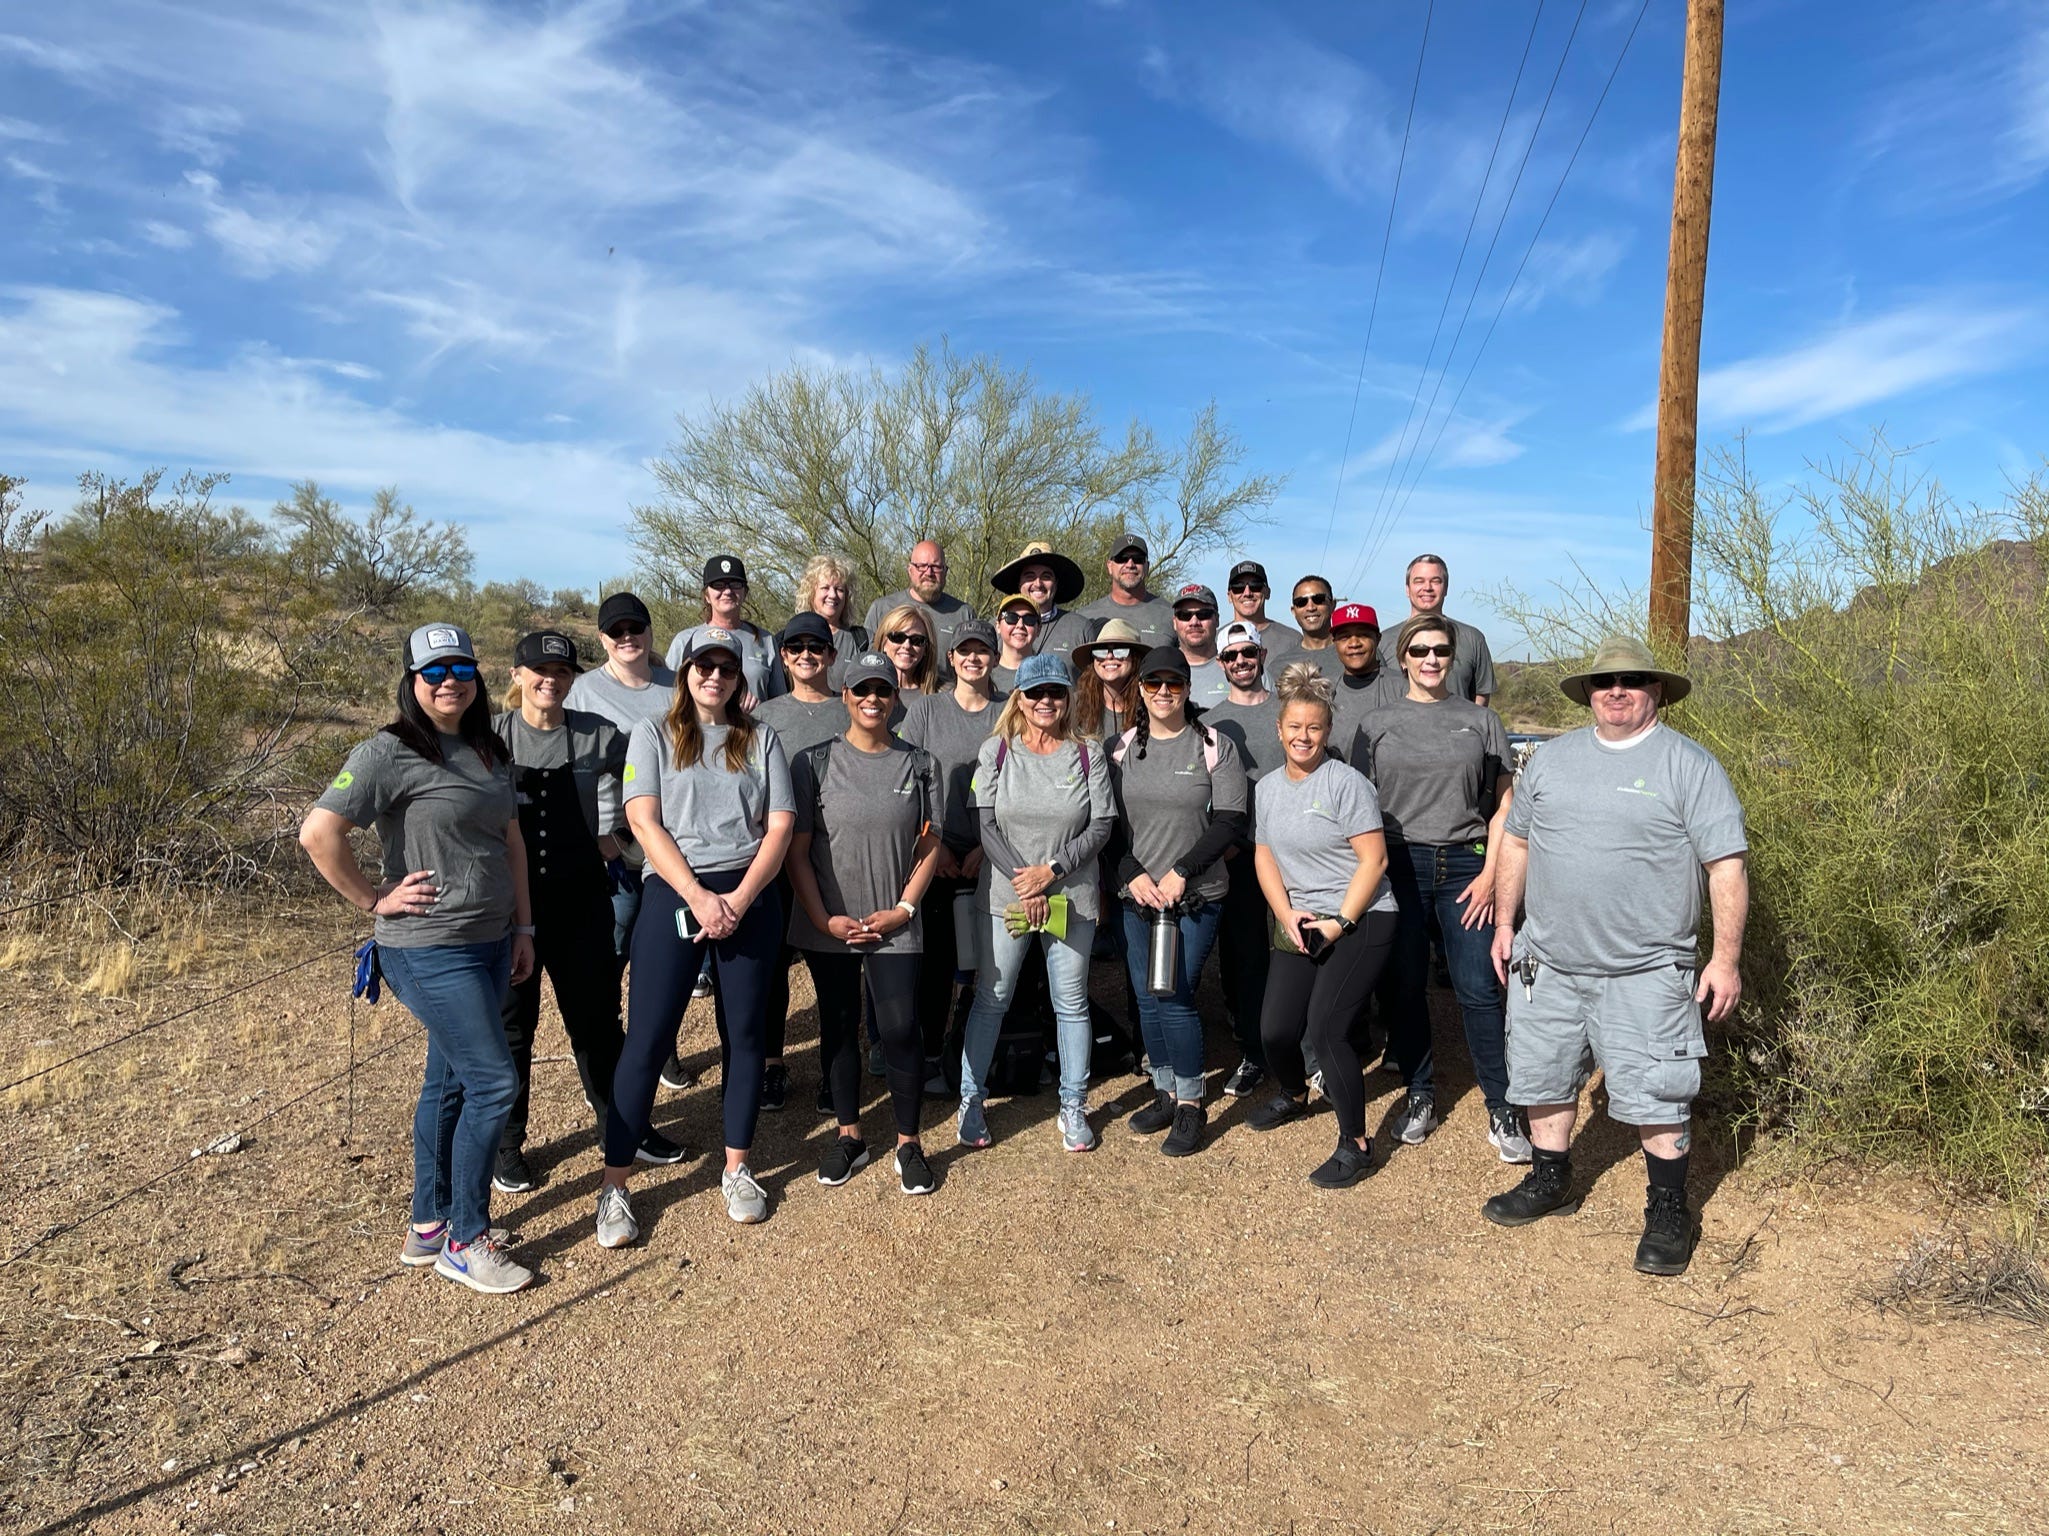 To kick off the launch of Invitation Homes’ new community partnership with Hawes Trail Alliance, a group of the company’s associates gathered in Mesa for a company volunteer day.